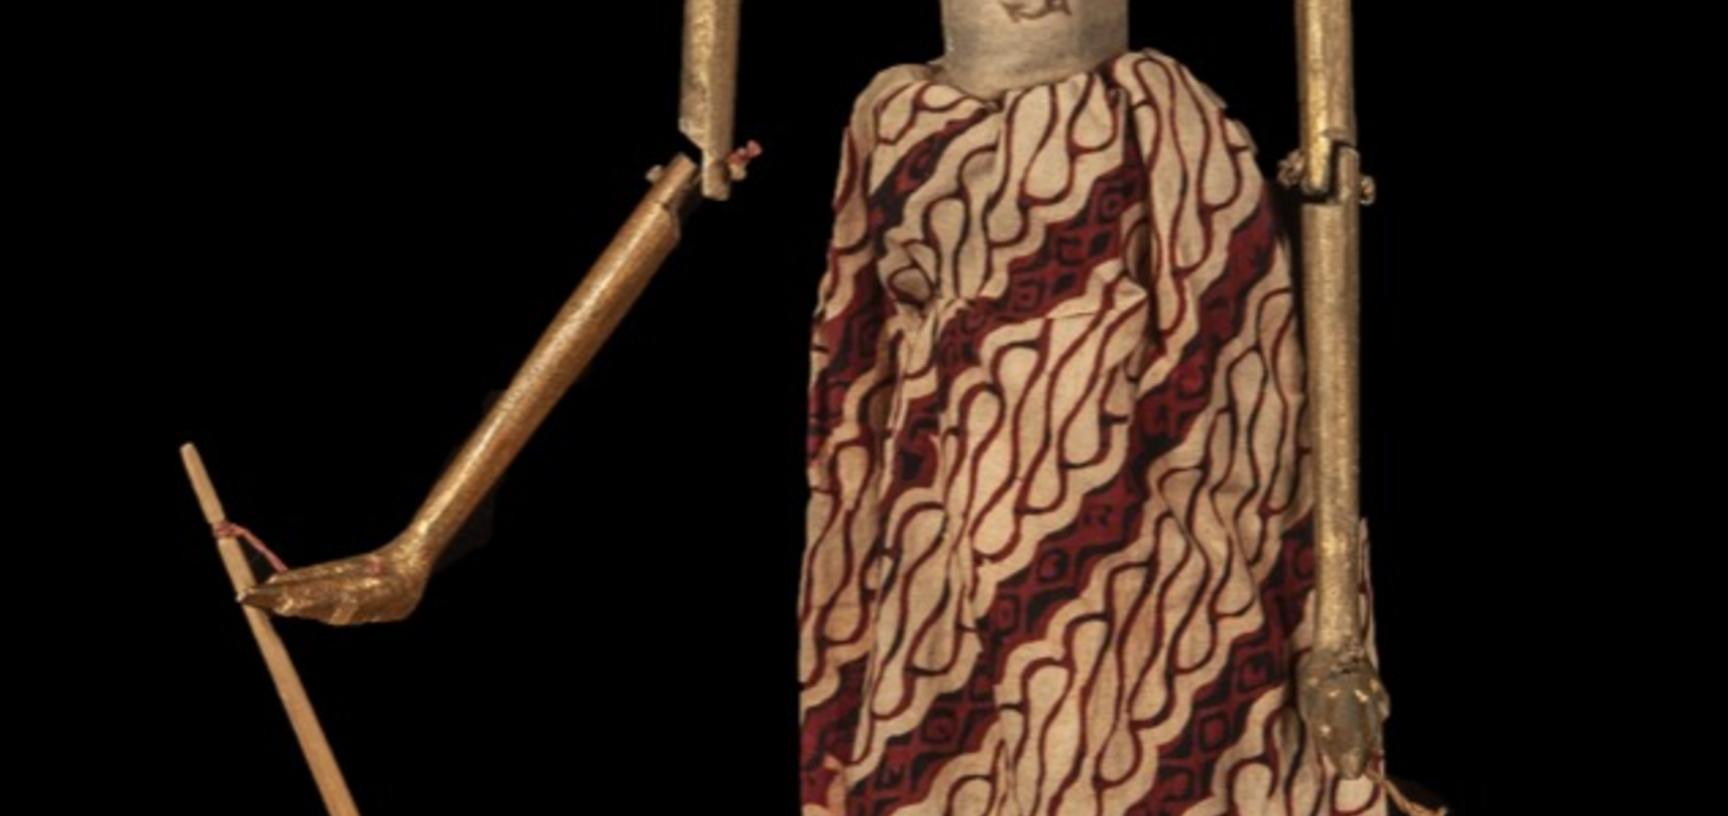 Wooden puppet with white face, body and hair painted gold, with long skirt of red and brown patterned cloth.